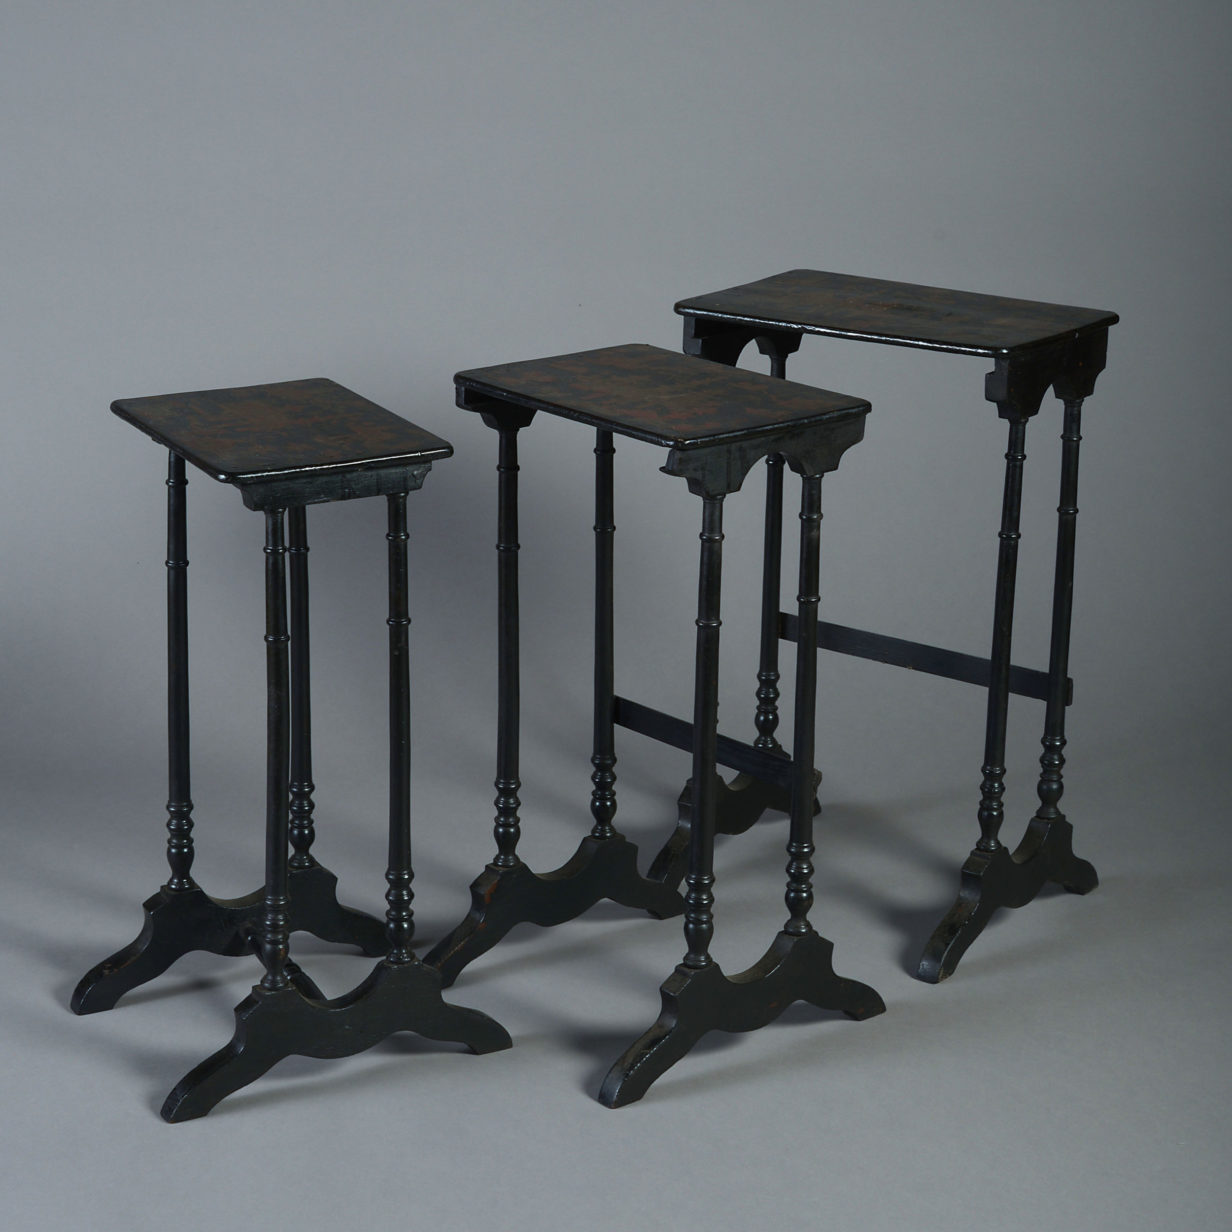 An early 19th century regency period nest of tables